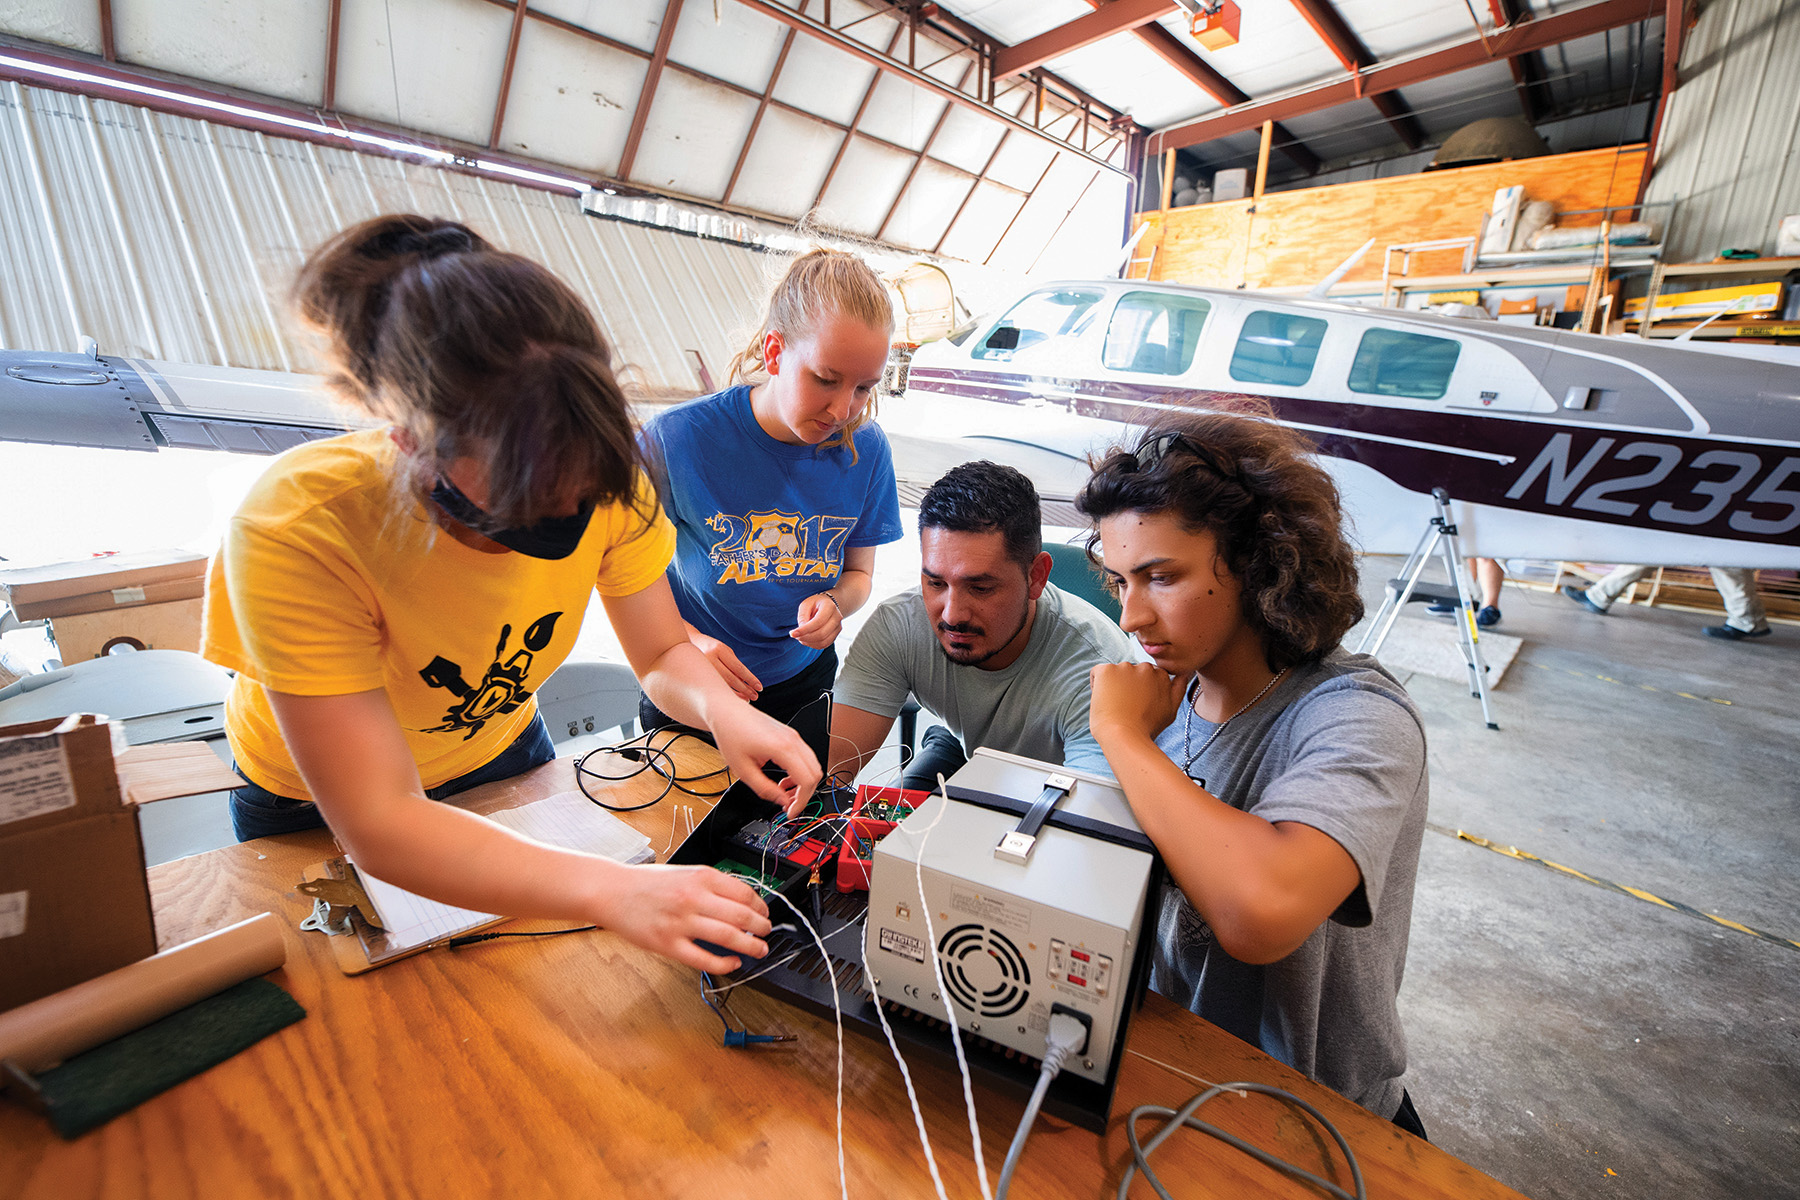 Students in Edge of Space Academy working together on instrument hardware; photo by Justin Torner